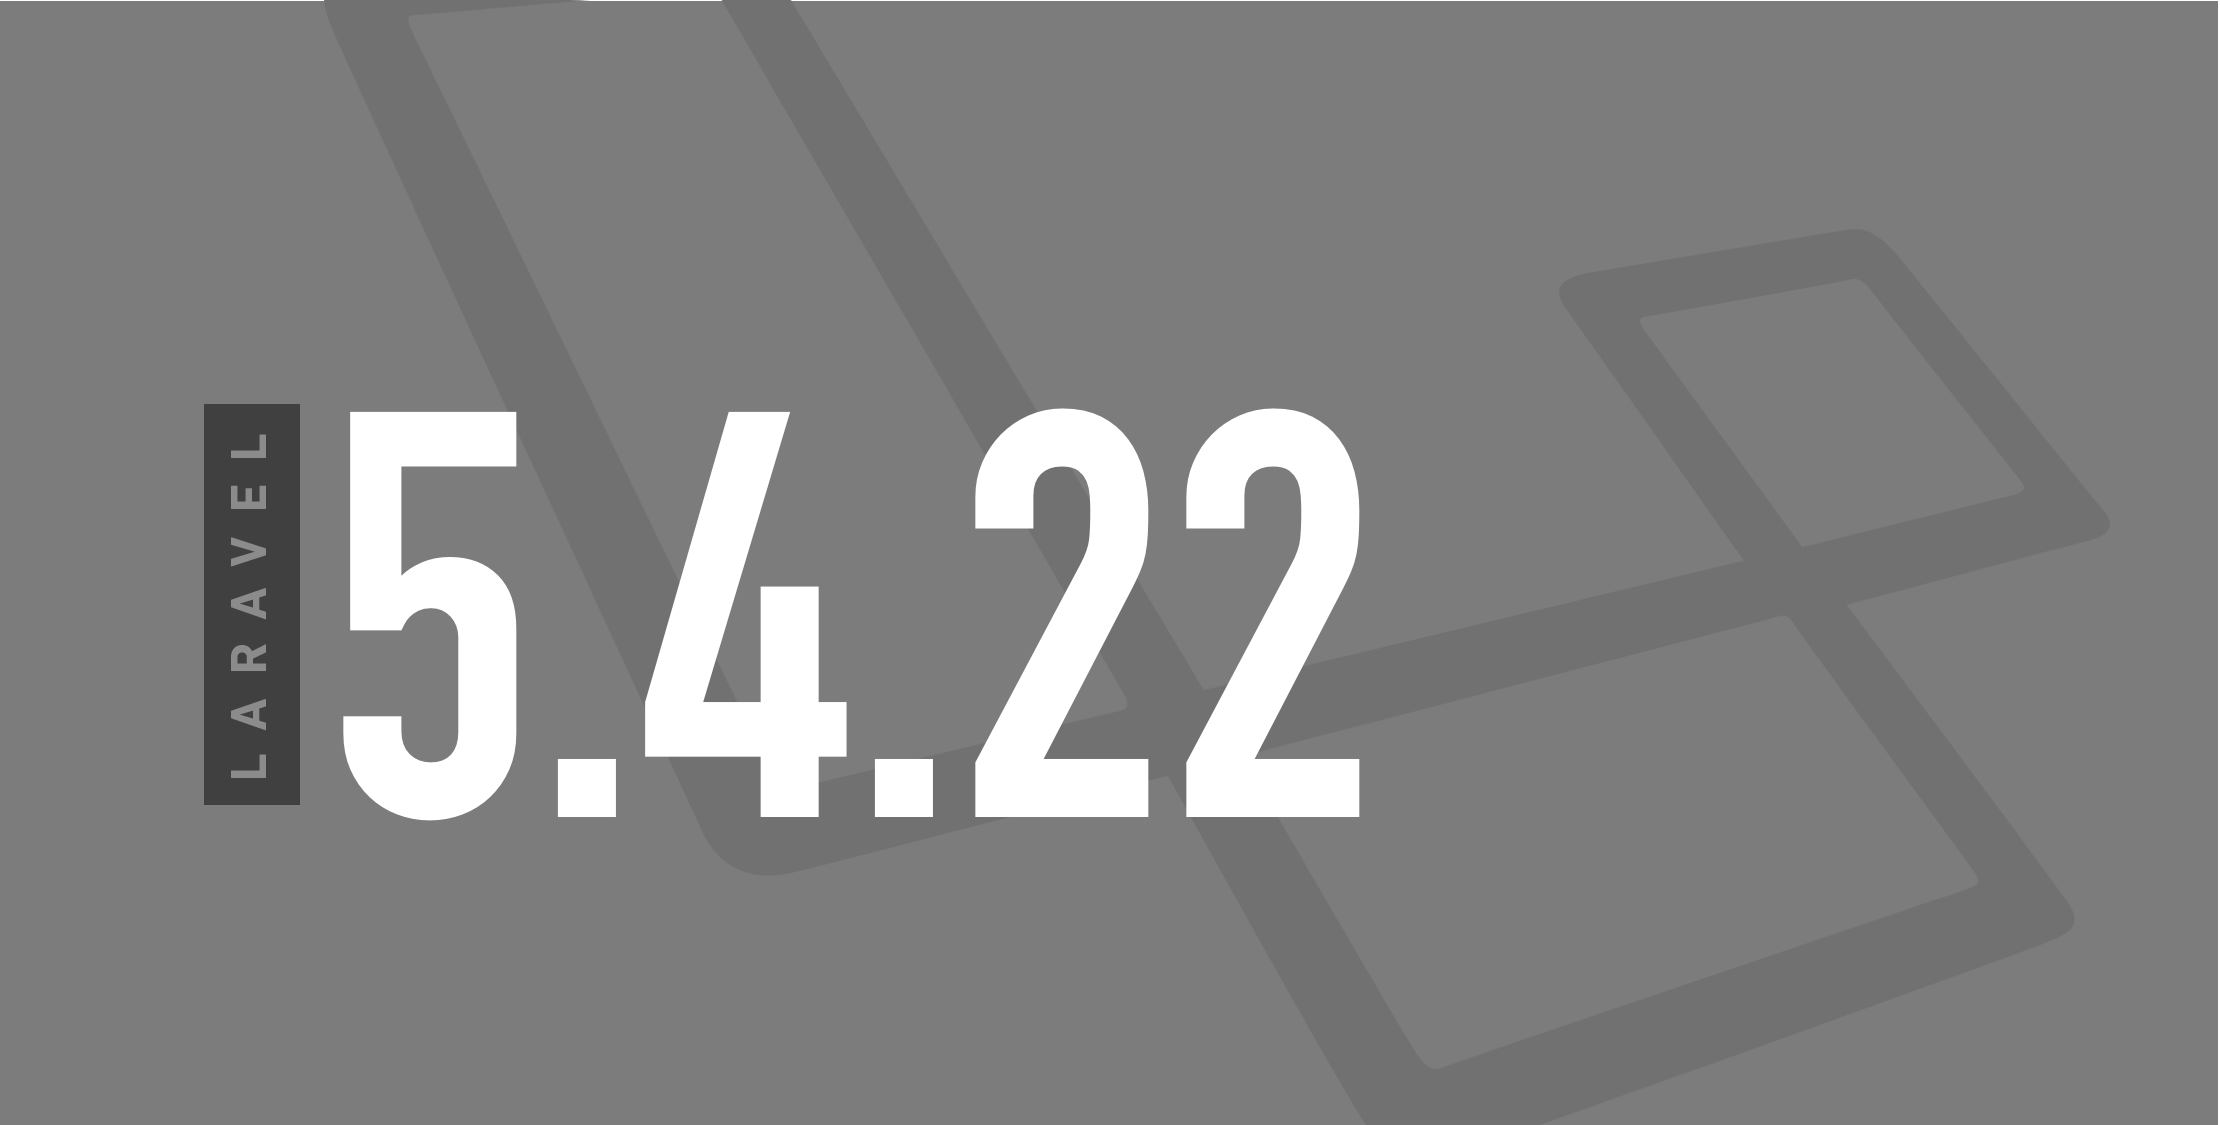 Laravel 5.4.22 Is Now Released and Includes a Security Fix image